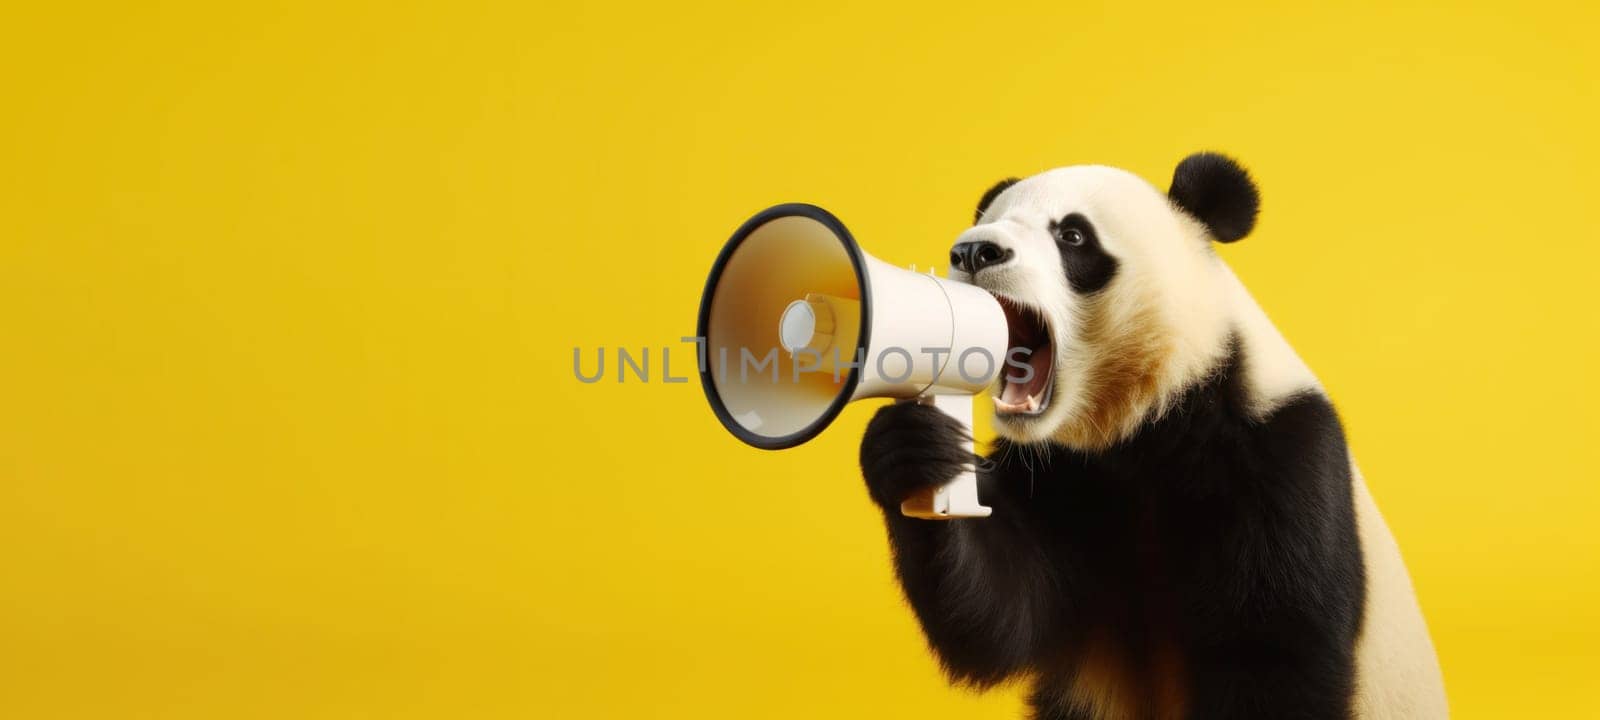 Panda with loudspeaker on yellow background by andreyz